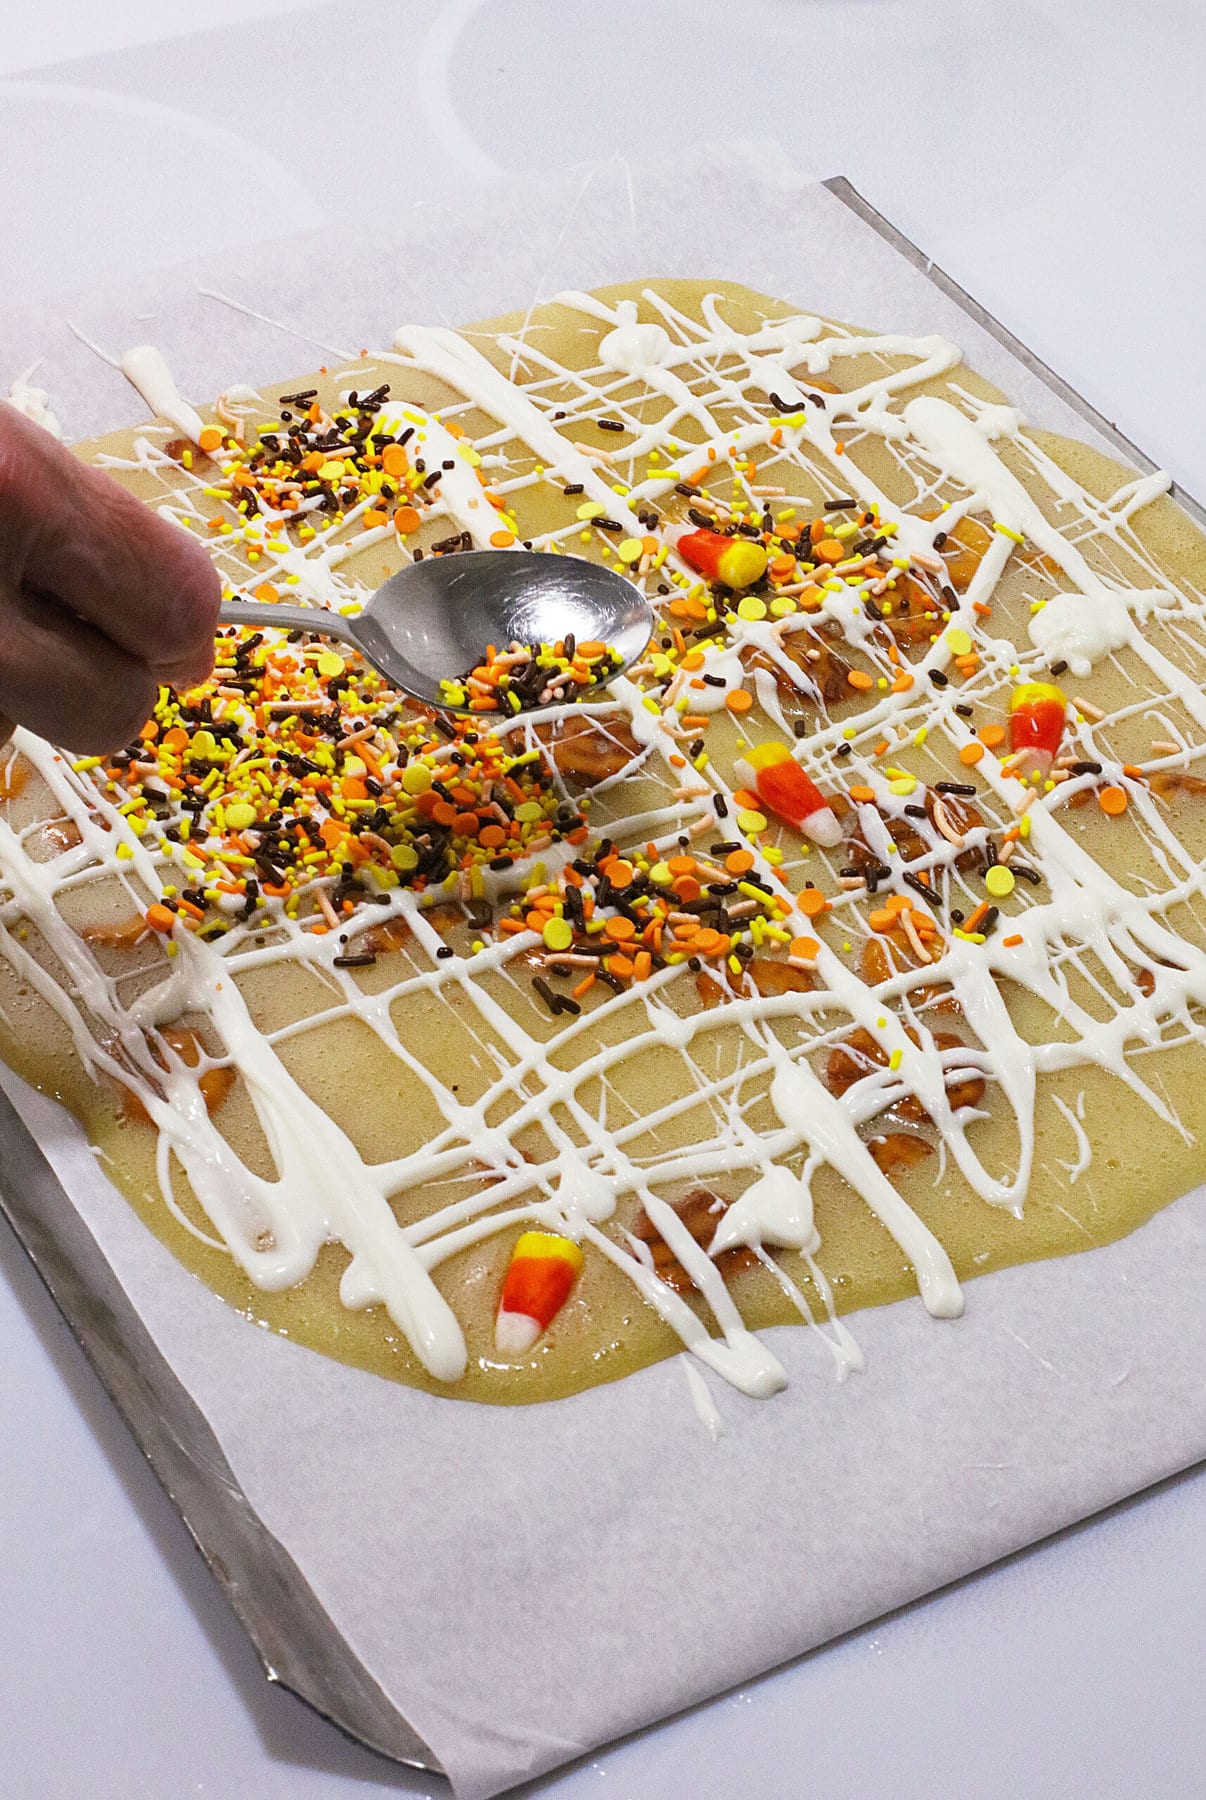 Adding the sprinkles on top.